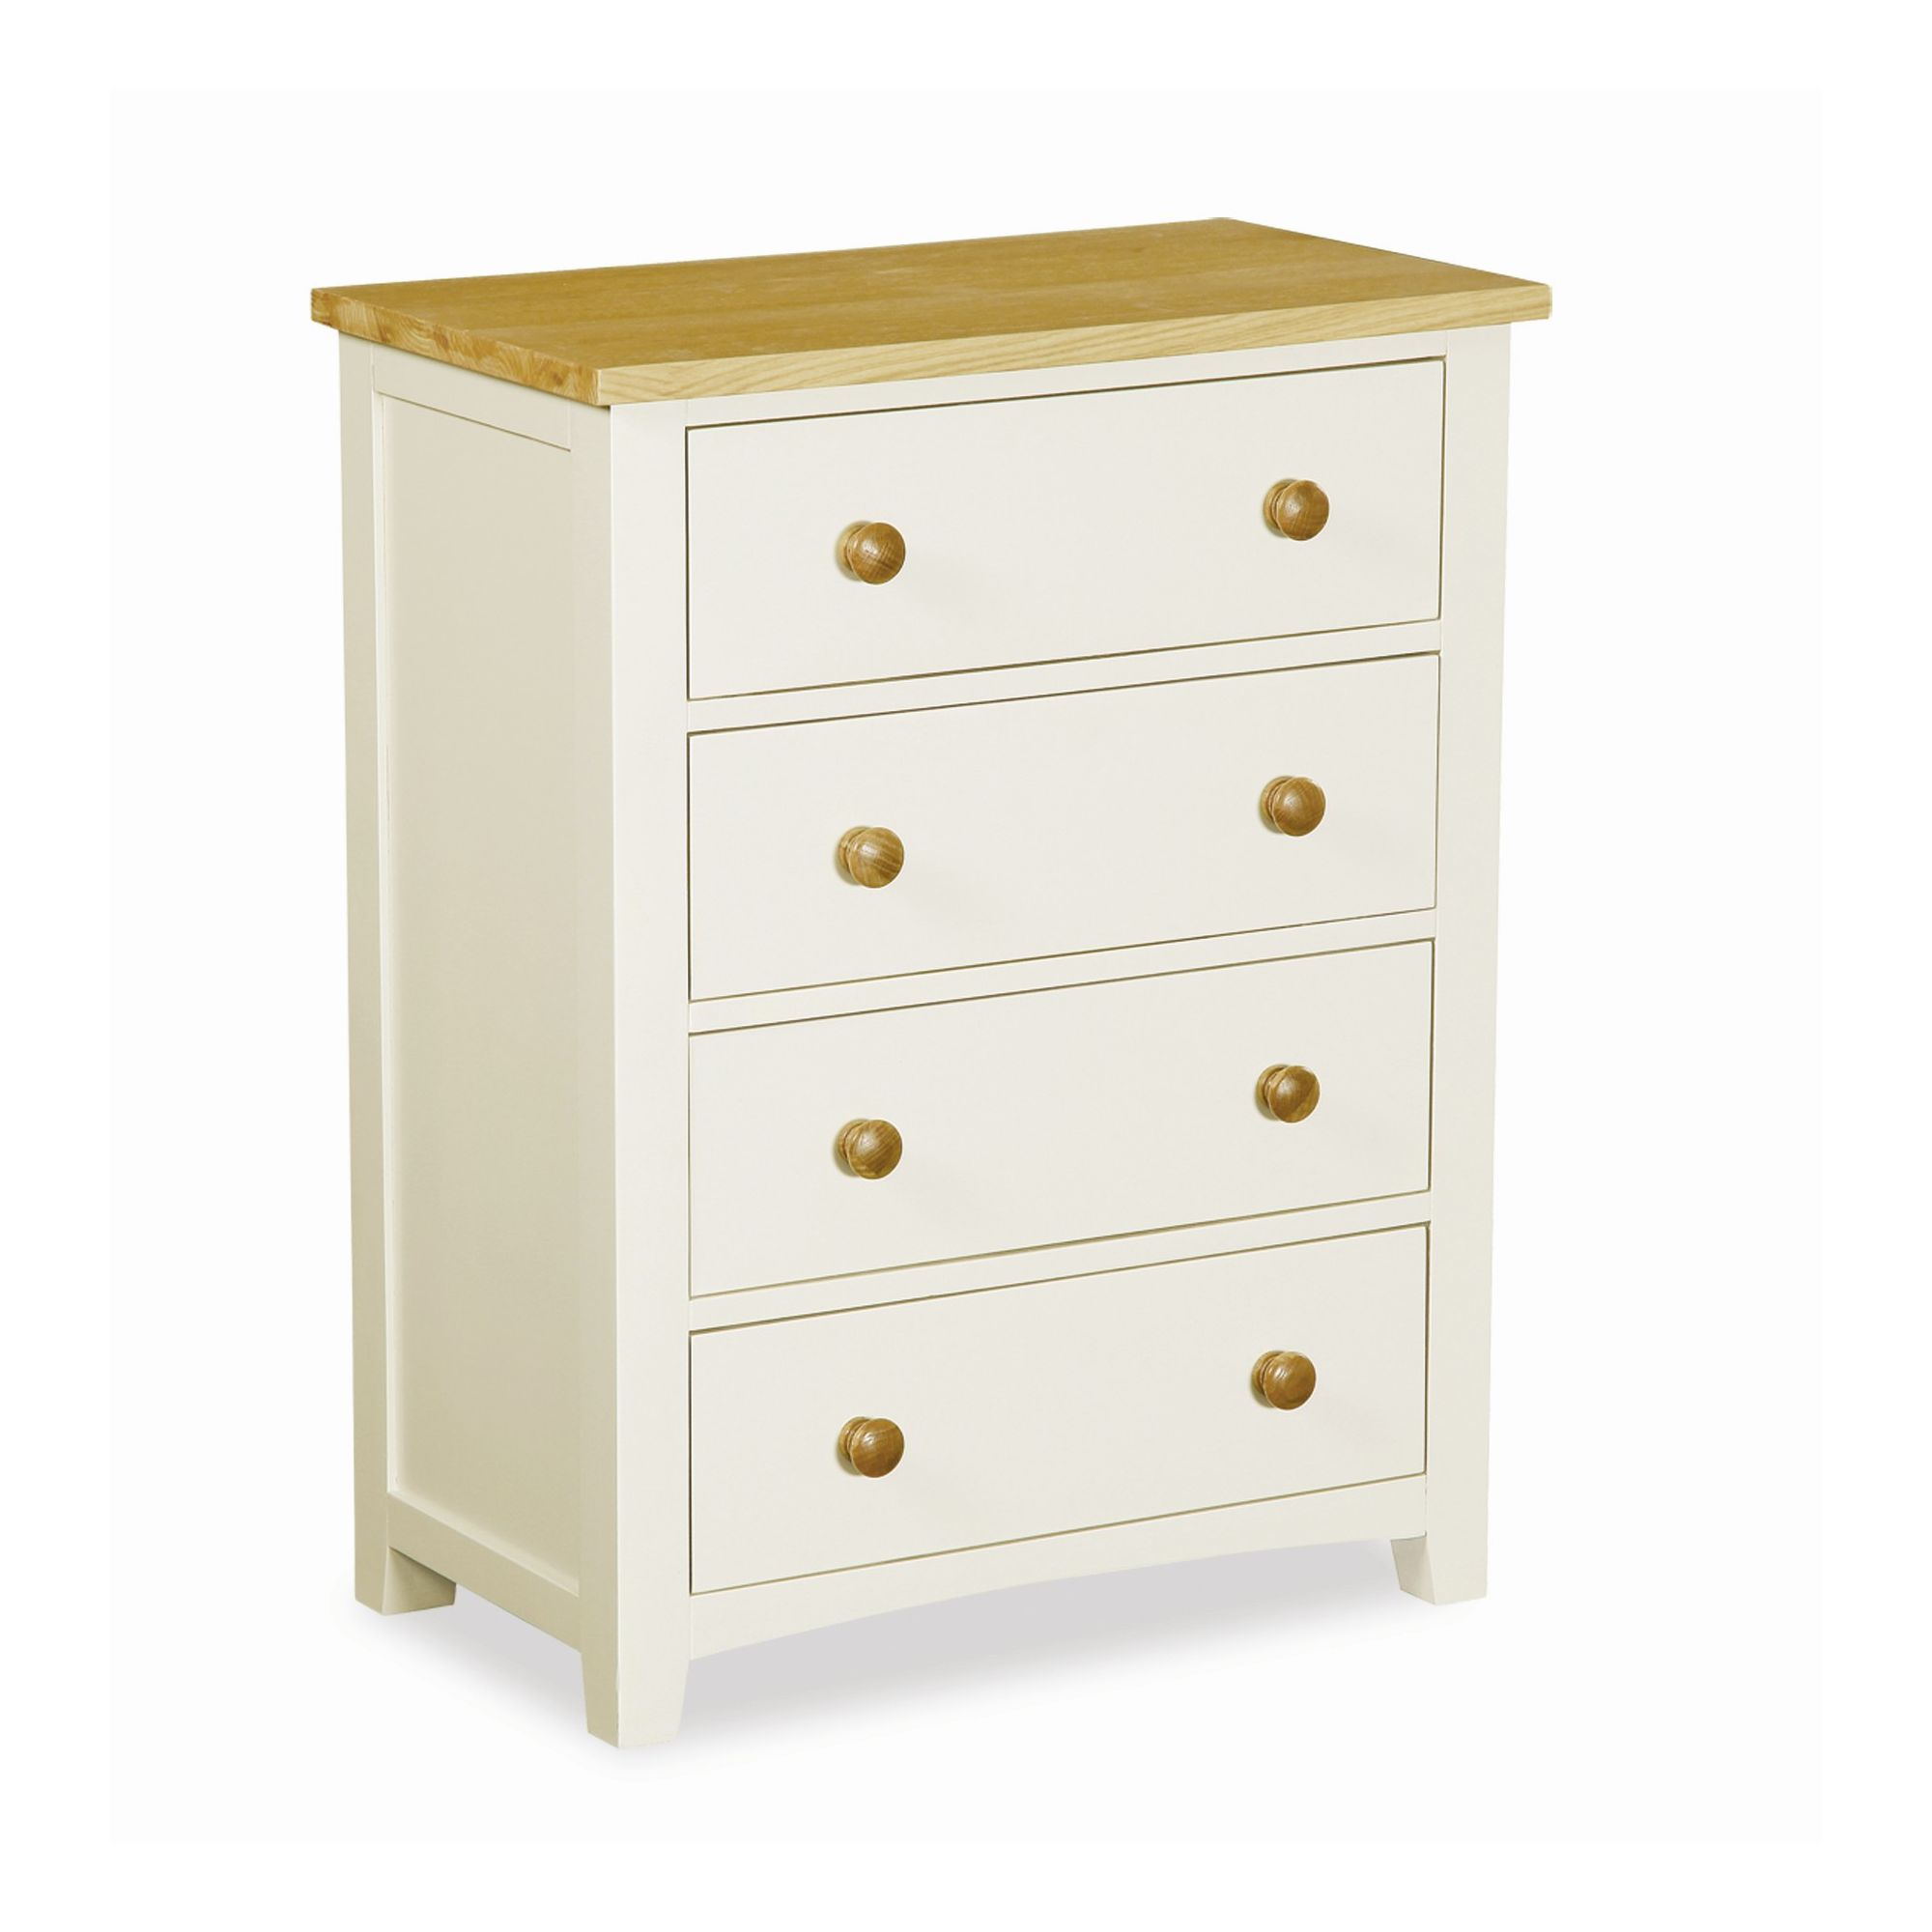 Alterton Furniture St. Ives 4 Drawer Chest at Tescos Direct